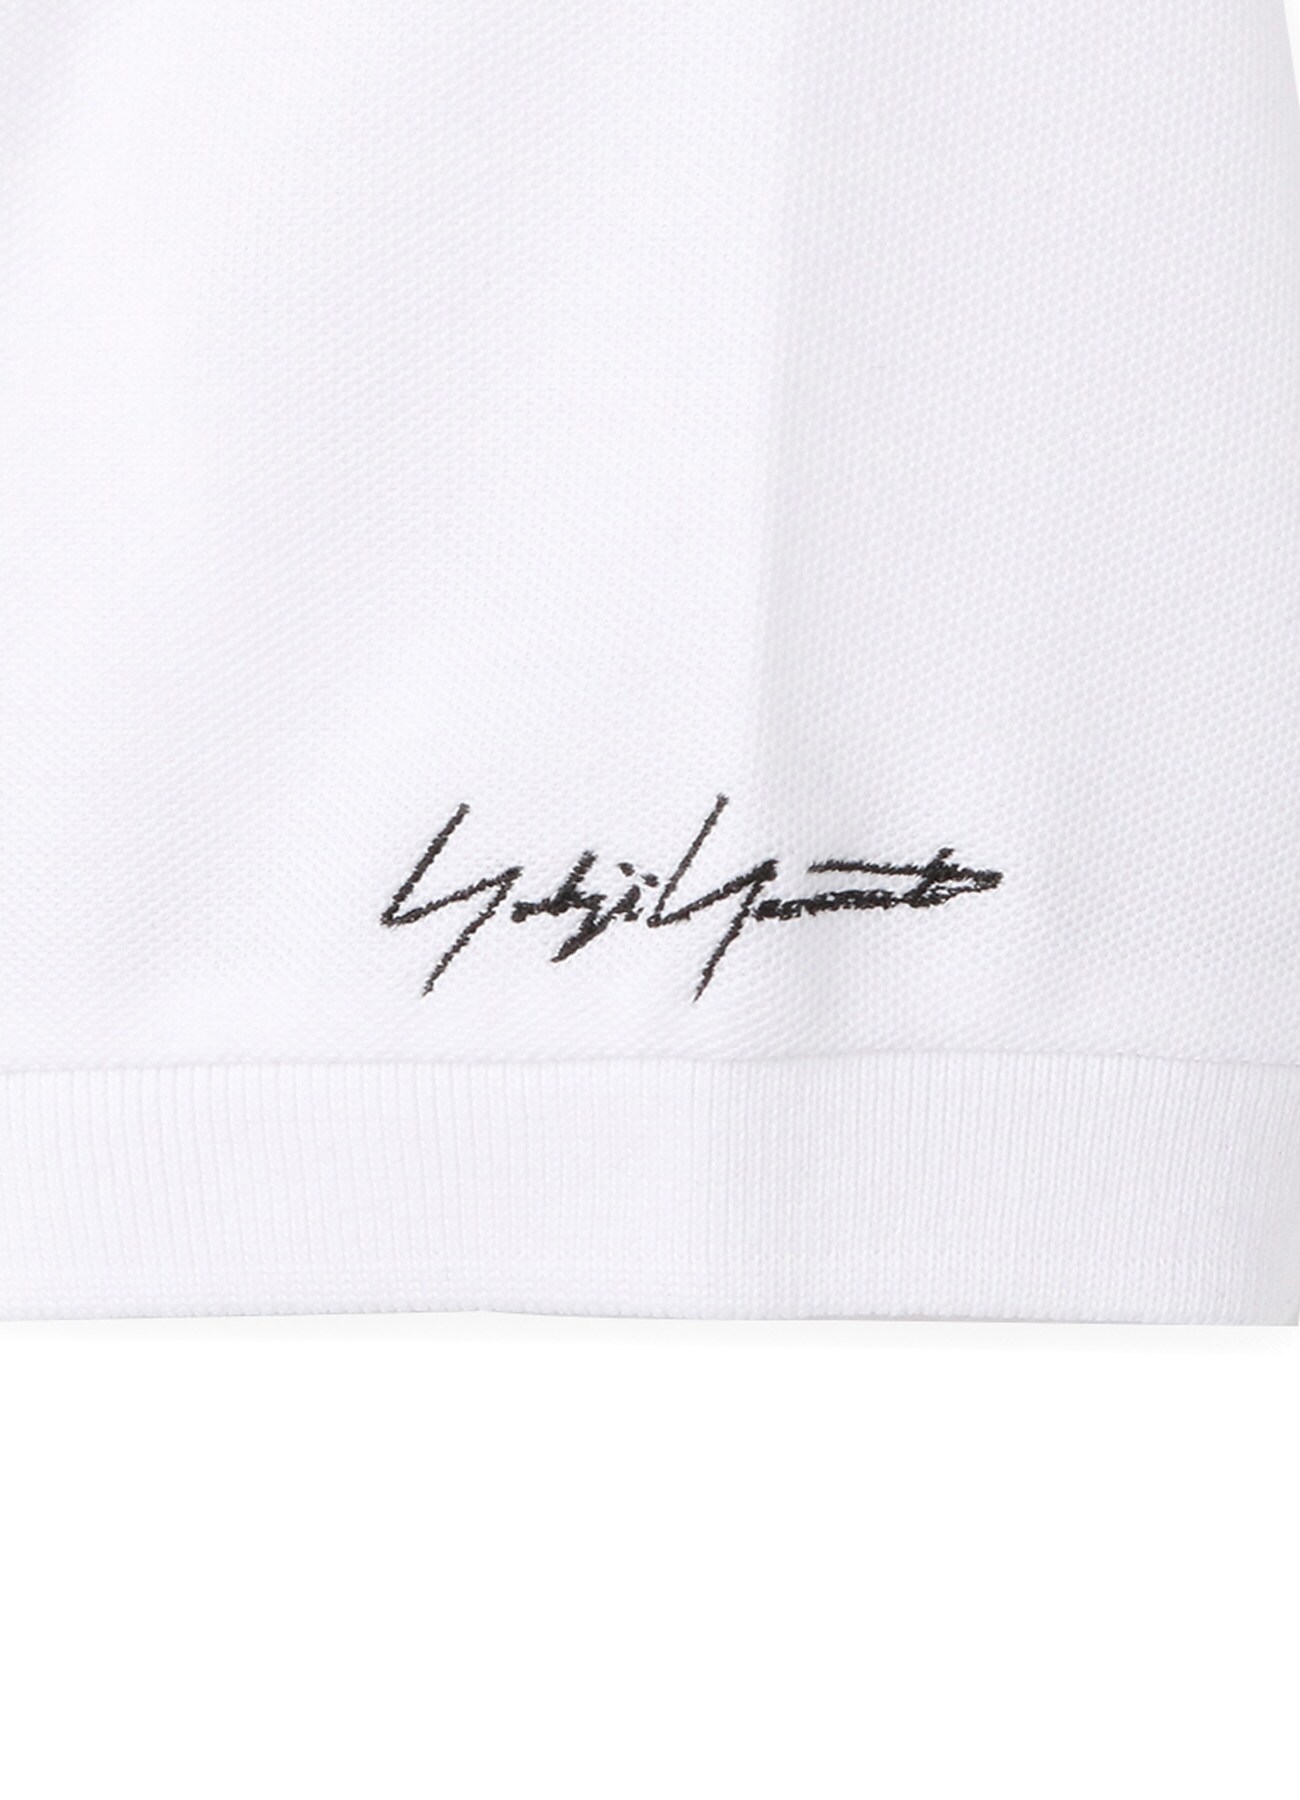 2PIECES PACK SIGNATURE EMBROIDERY POLO SHIRTS